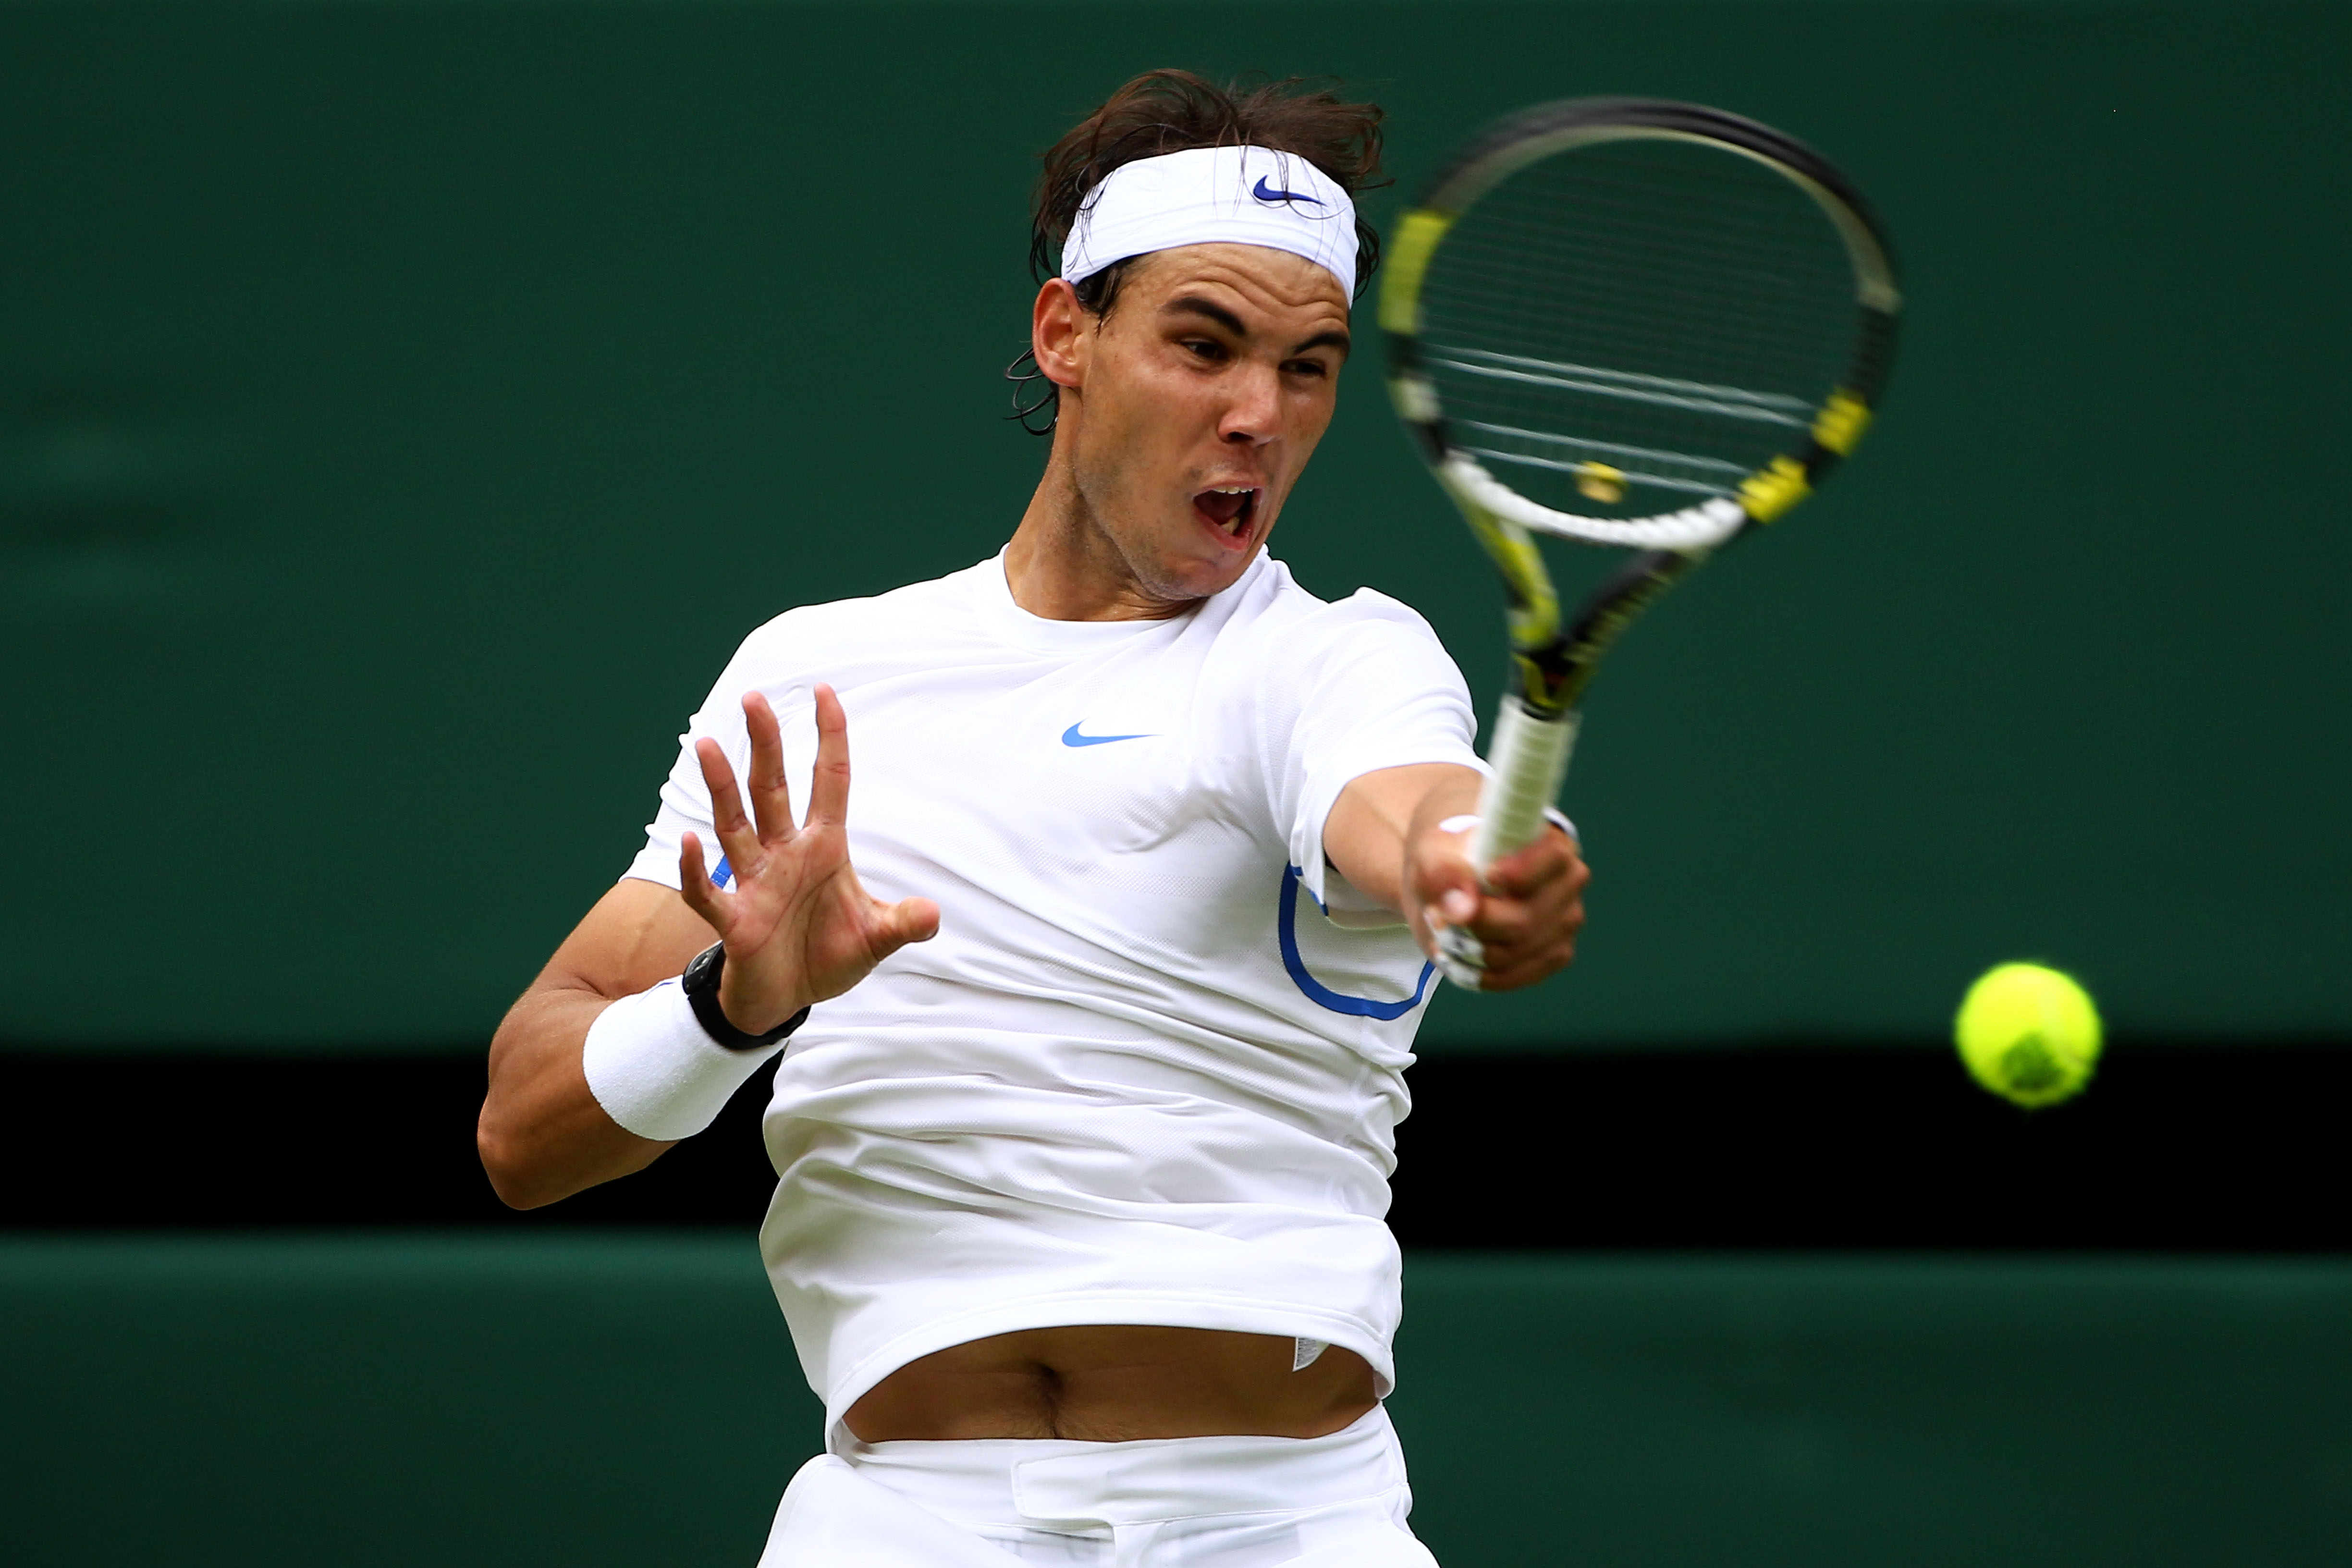 LONDON, ENGLAND - JUNE 20:  Rafael Nadal of Spain returns a shot during his first round match against Michael Russell of the United States on Day One of the Wimbledon Lawn Tennis Championships at the All England Lawn Tennis and Croquet Club on June 20, 20